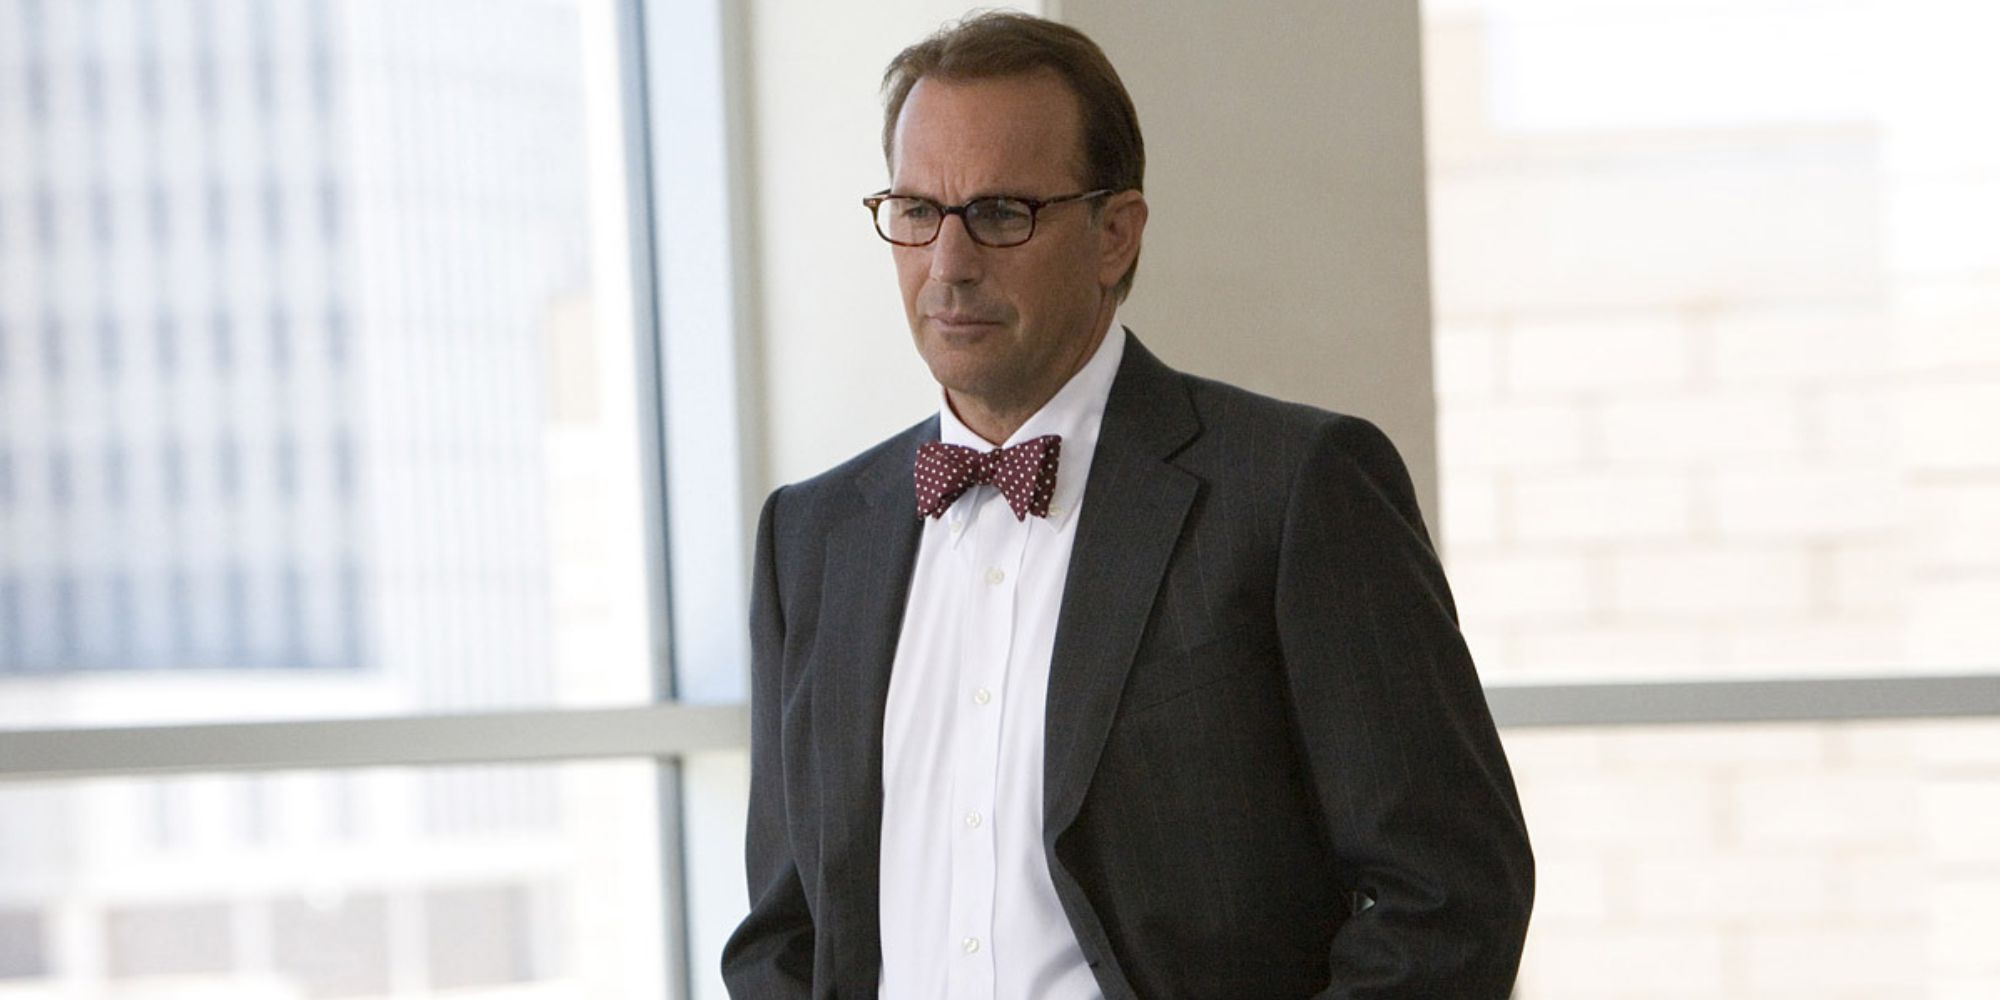 Kevin Costner as Earl Brooks/The Thumbprint Killer, wearing a suit and glasses, standing in a room with lots of windows in Mr. Brooks